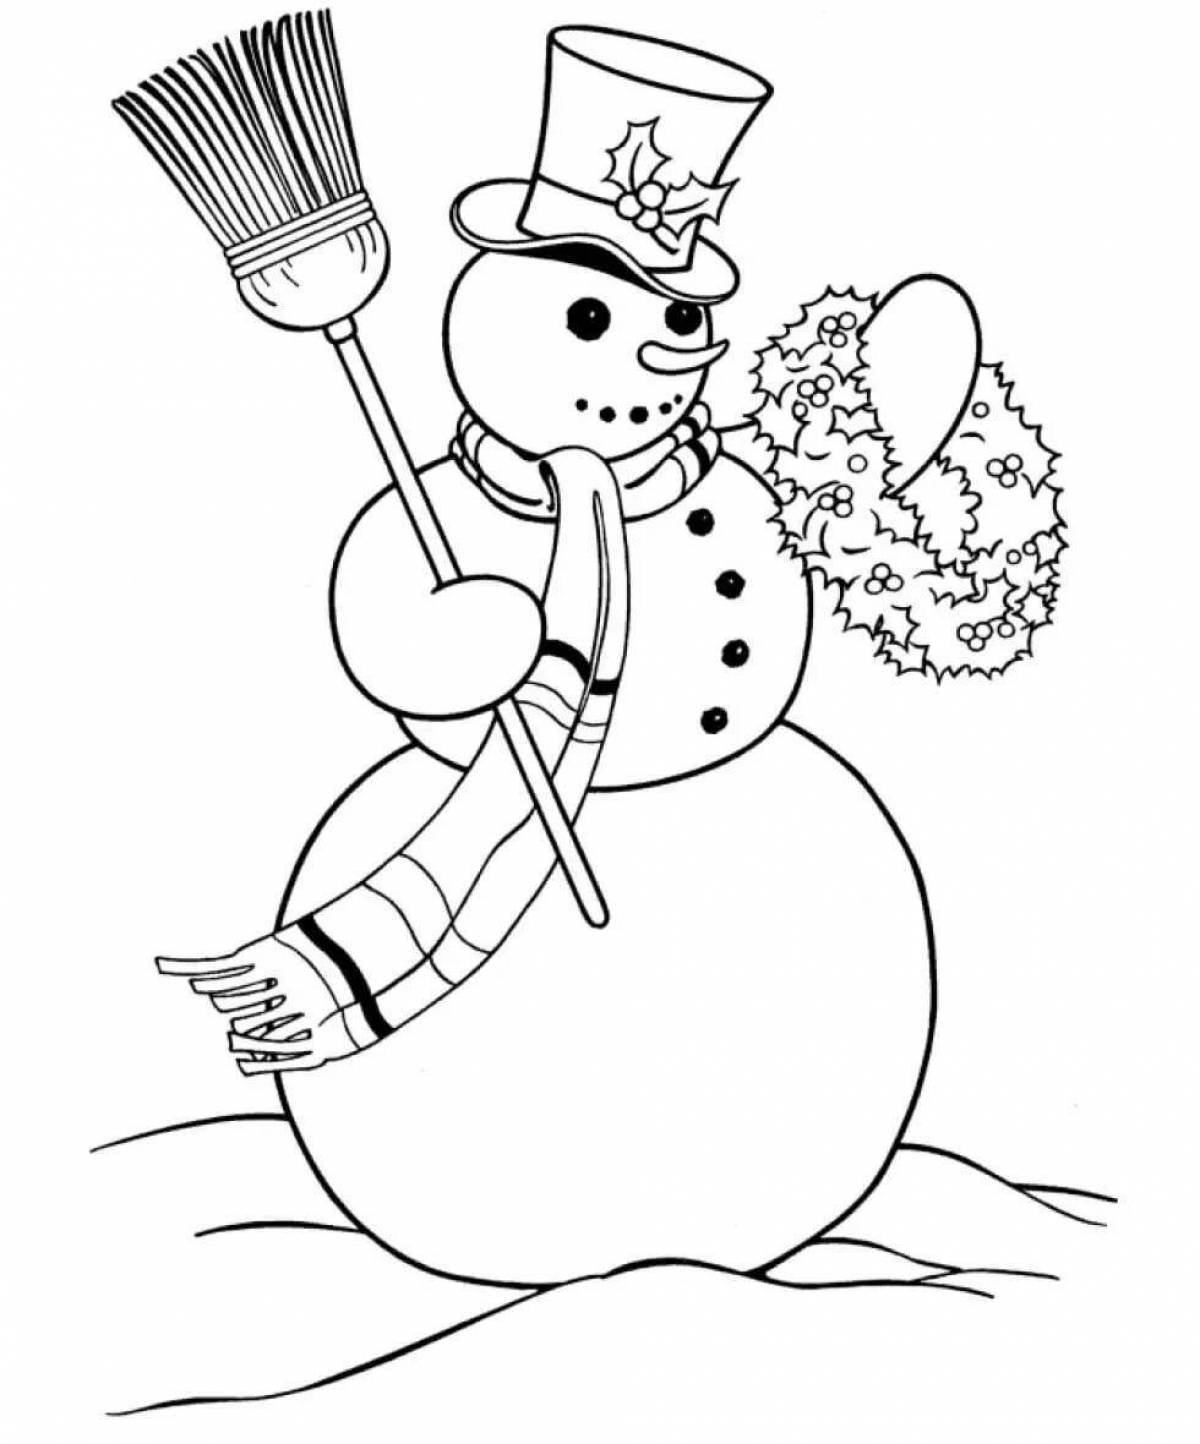 Colored snowman for children 2-3 years old